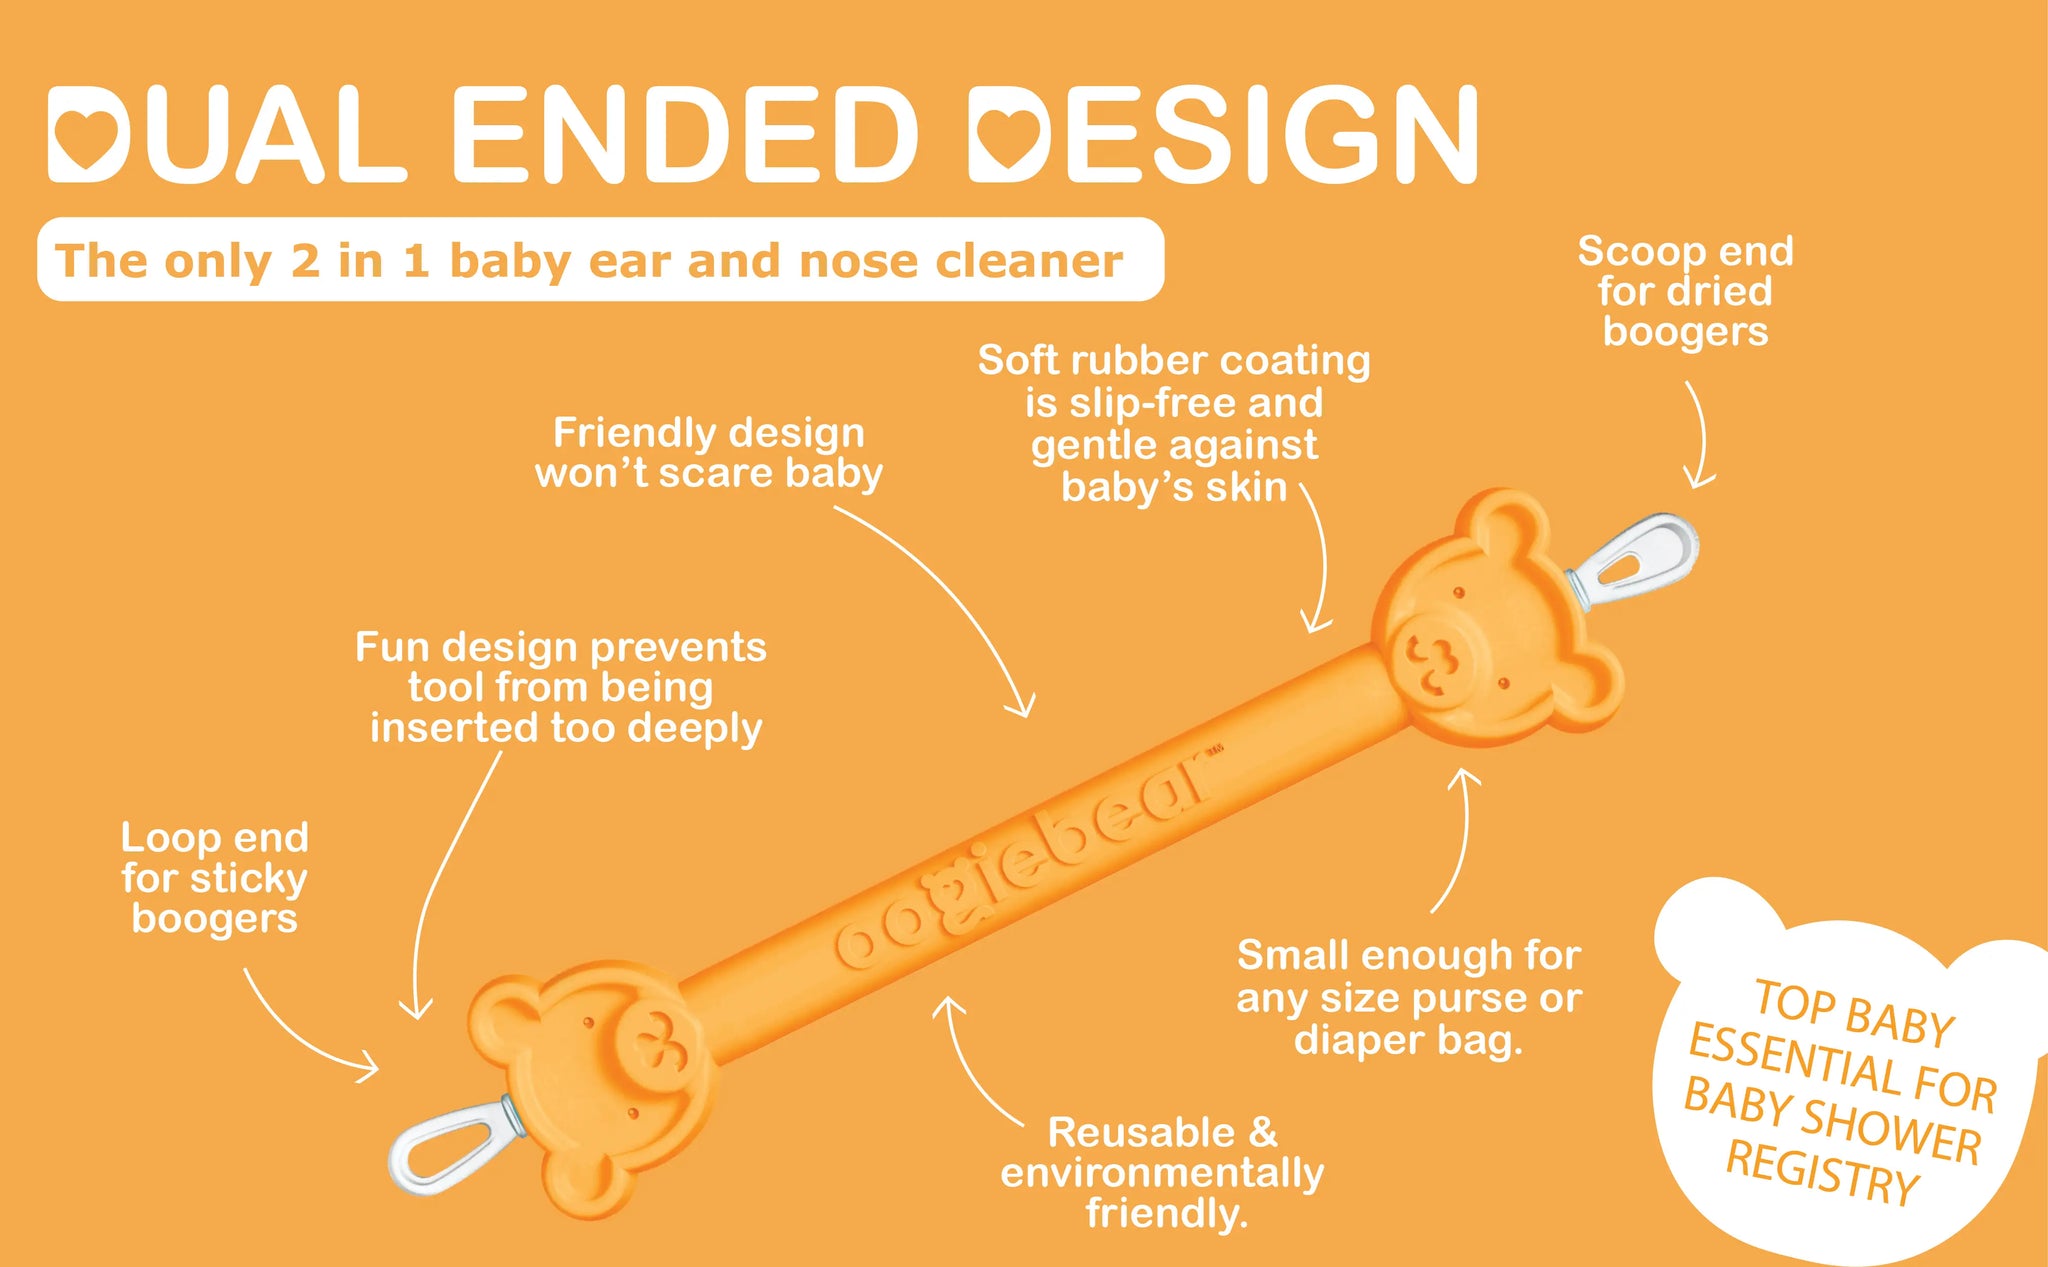 Oogie Bear Baby Nose & Ear Cleaner